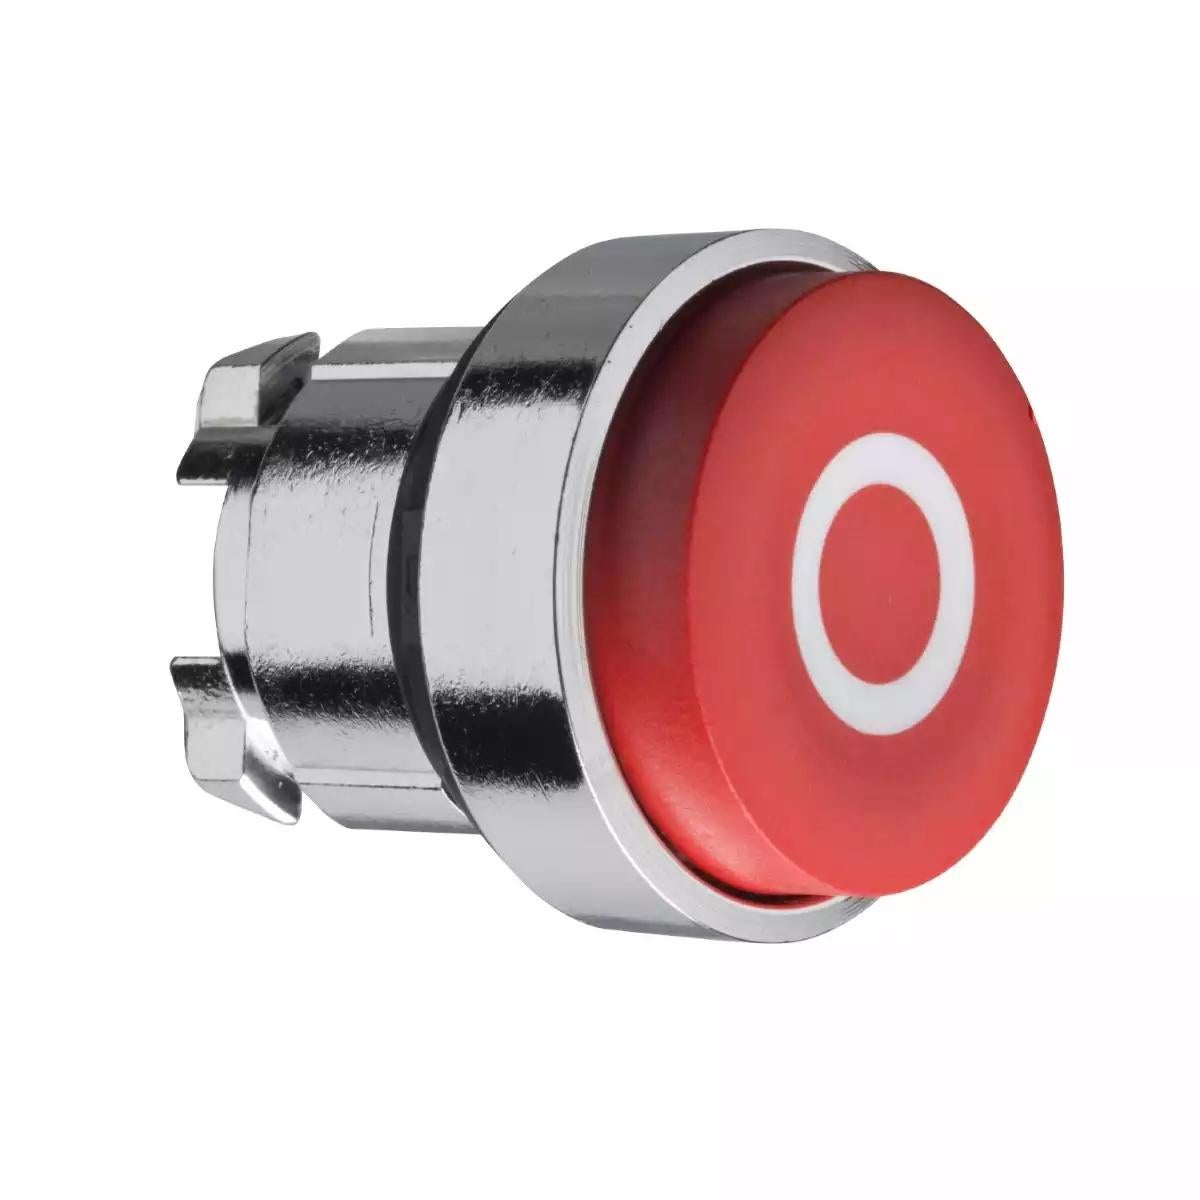 Projecting push button head 40mm, Harmony XB4, metal, red, 22mm, spring return, marked O